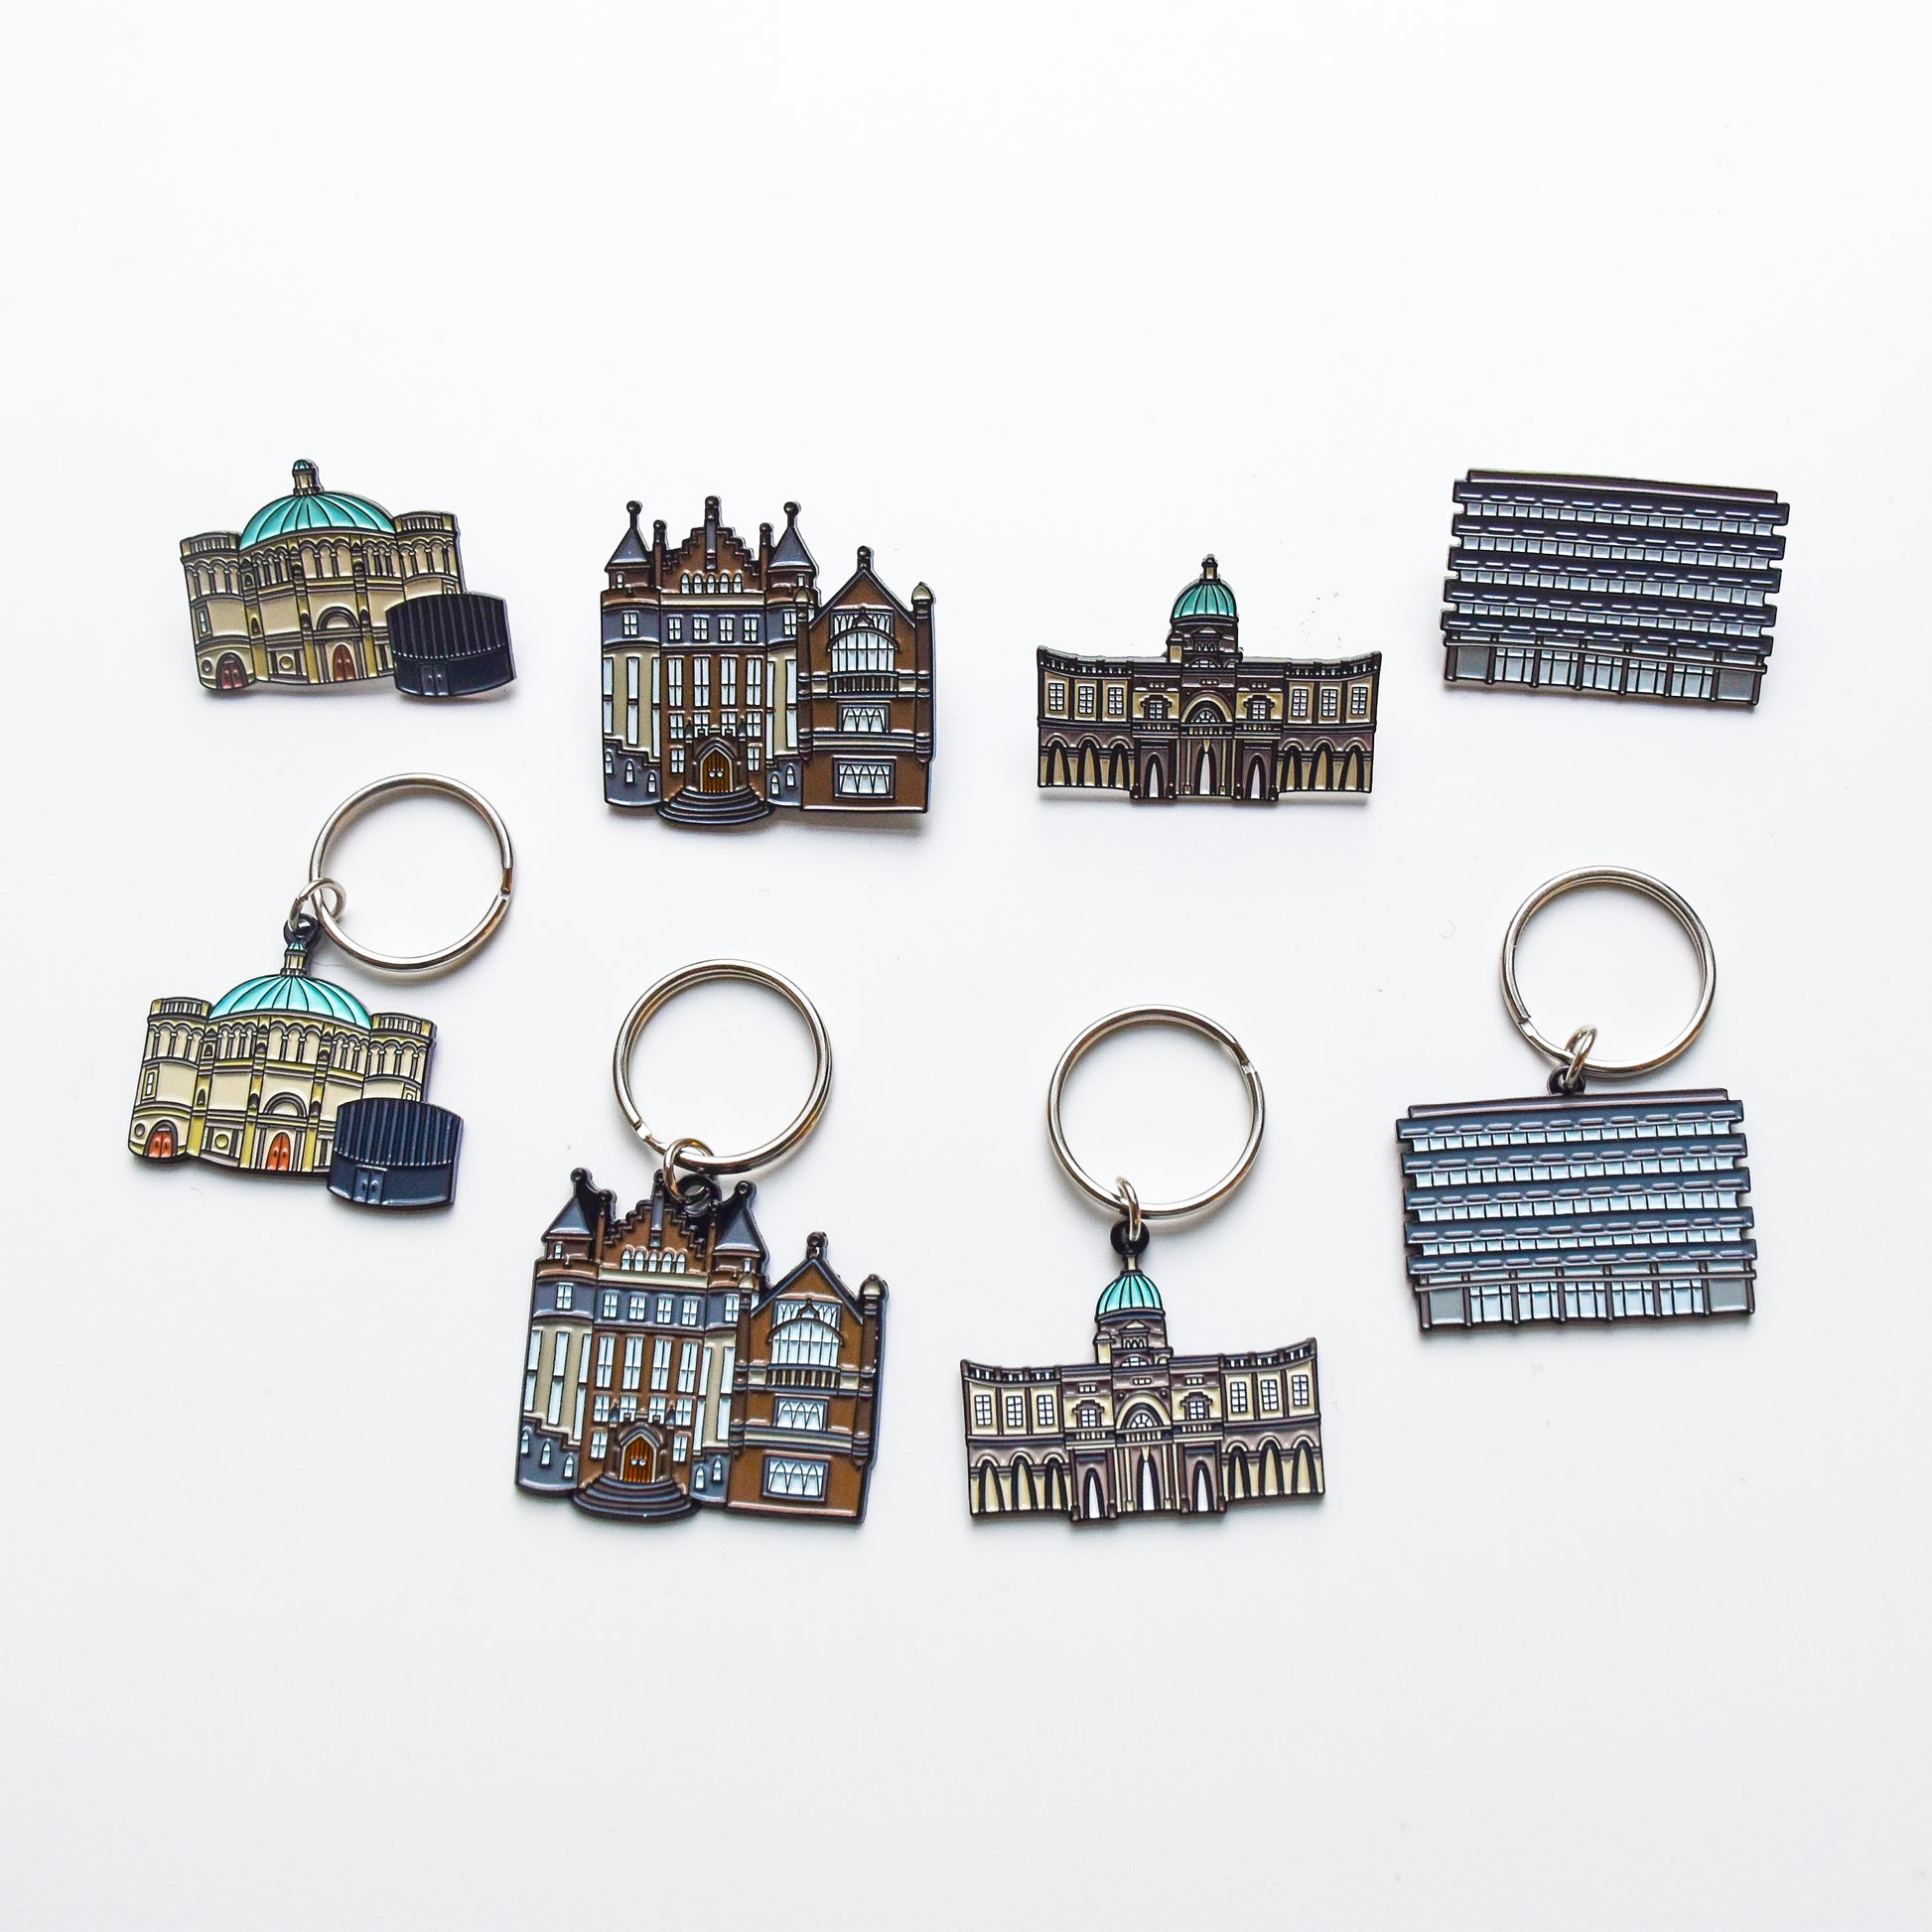 A selection of our Enamel Keyrings with their matching Enamel Pin counterparts. The deigns shown here are: Mc Ewan Hall, Teviot Row House, Old College and Main Library.